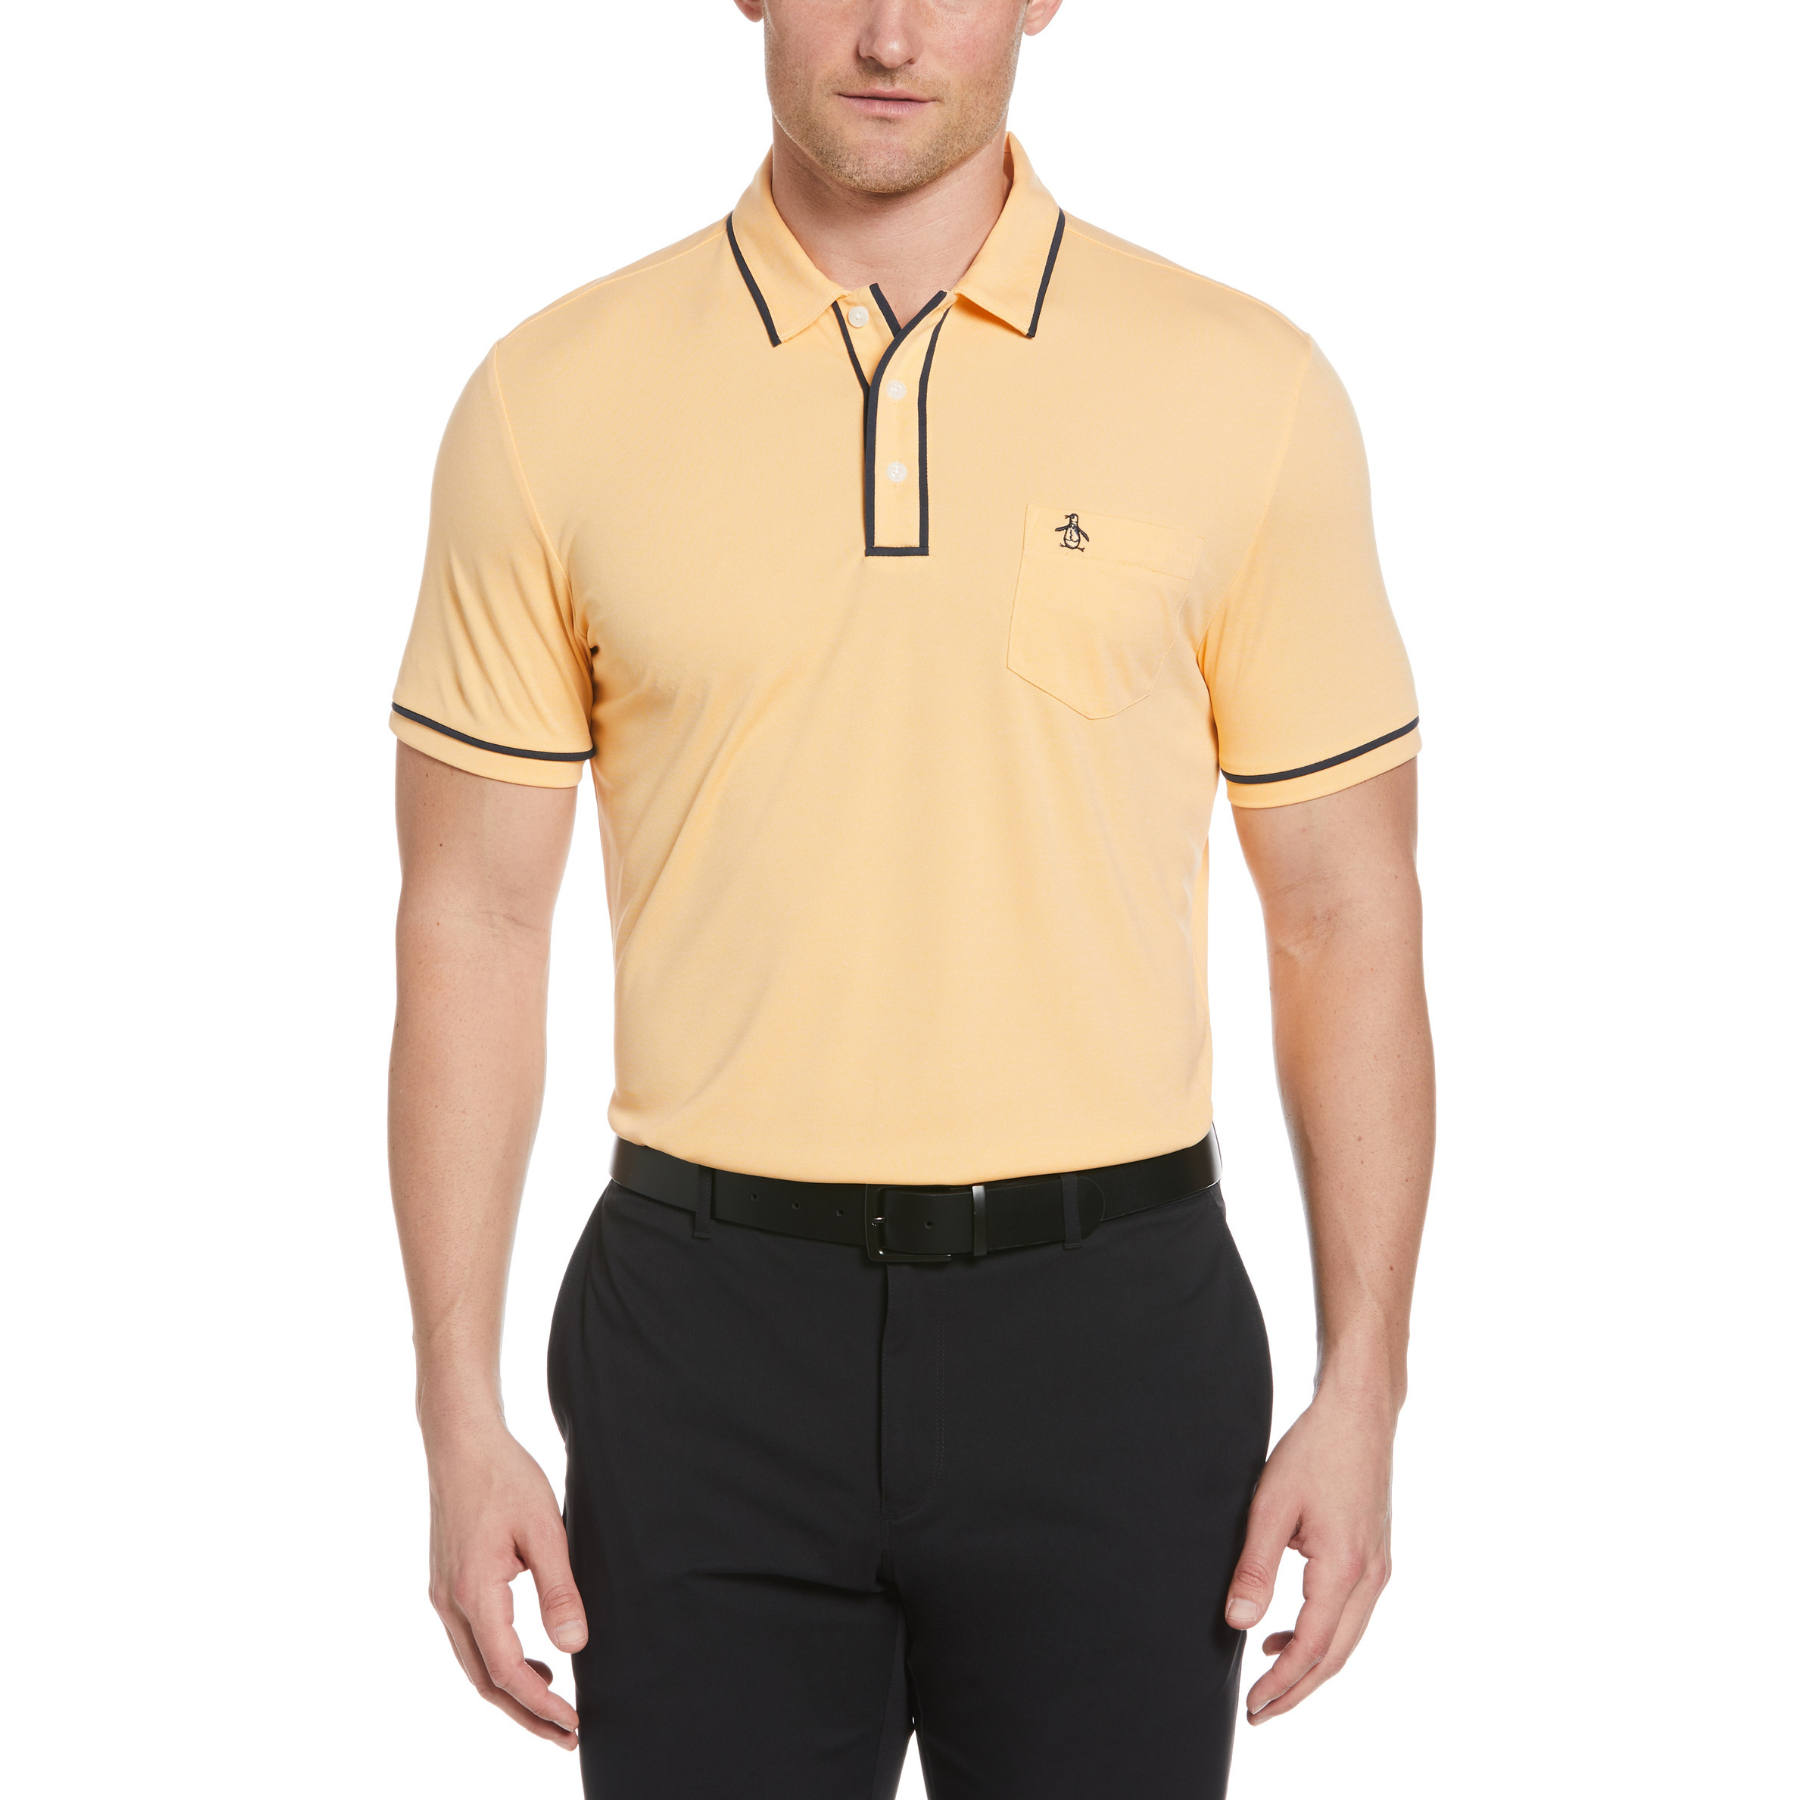 View Eco Performance Earl Golf Polo Shirt In Warm Apricot information